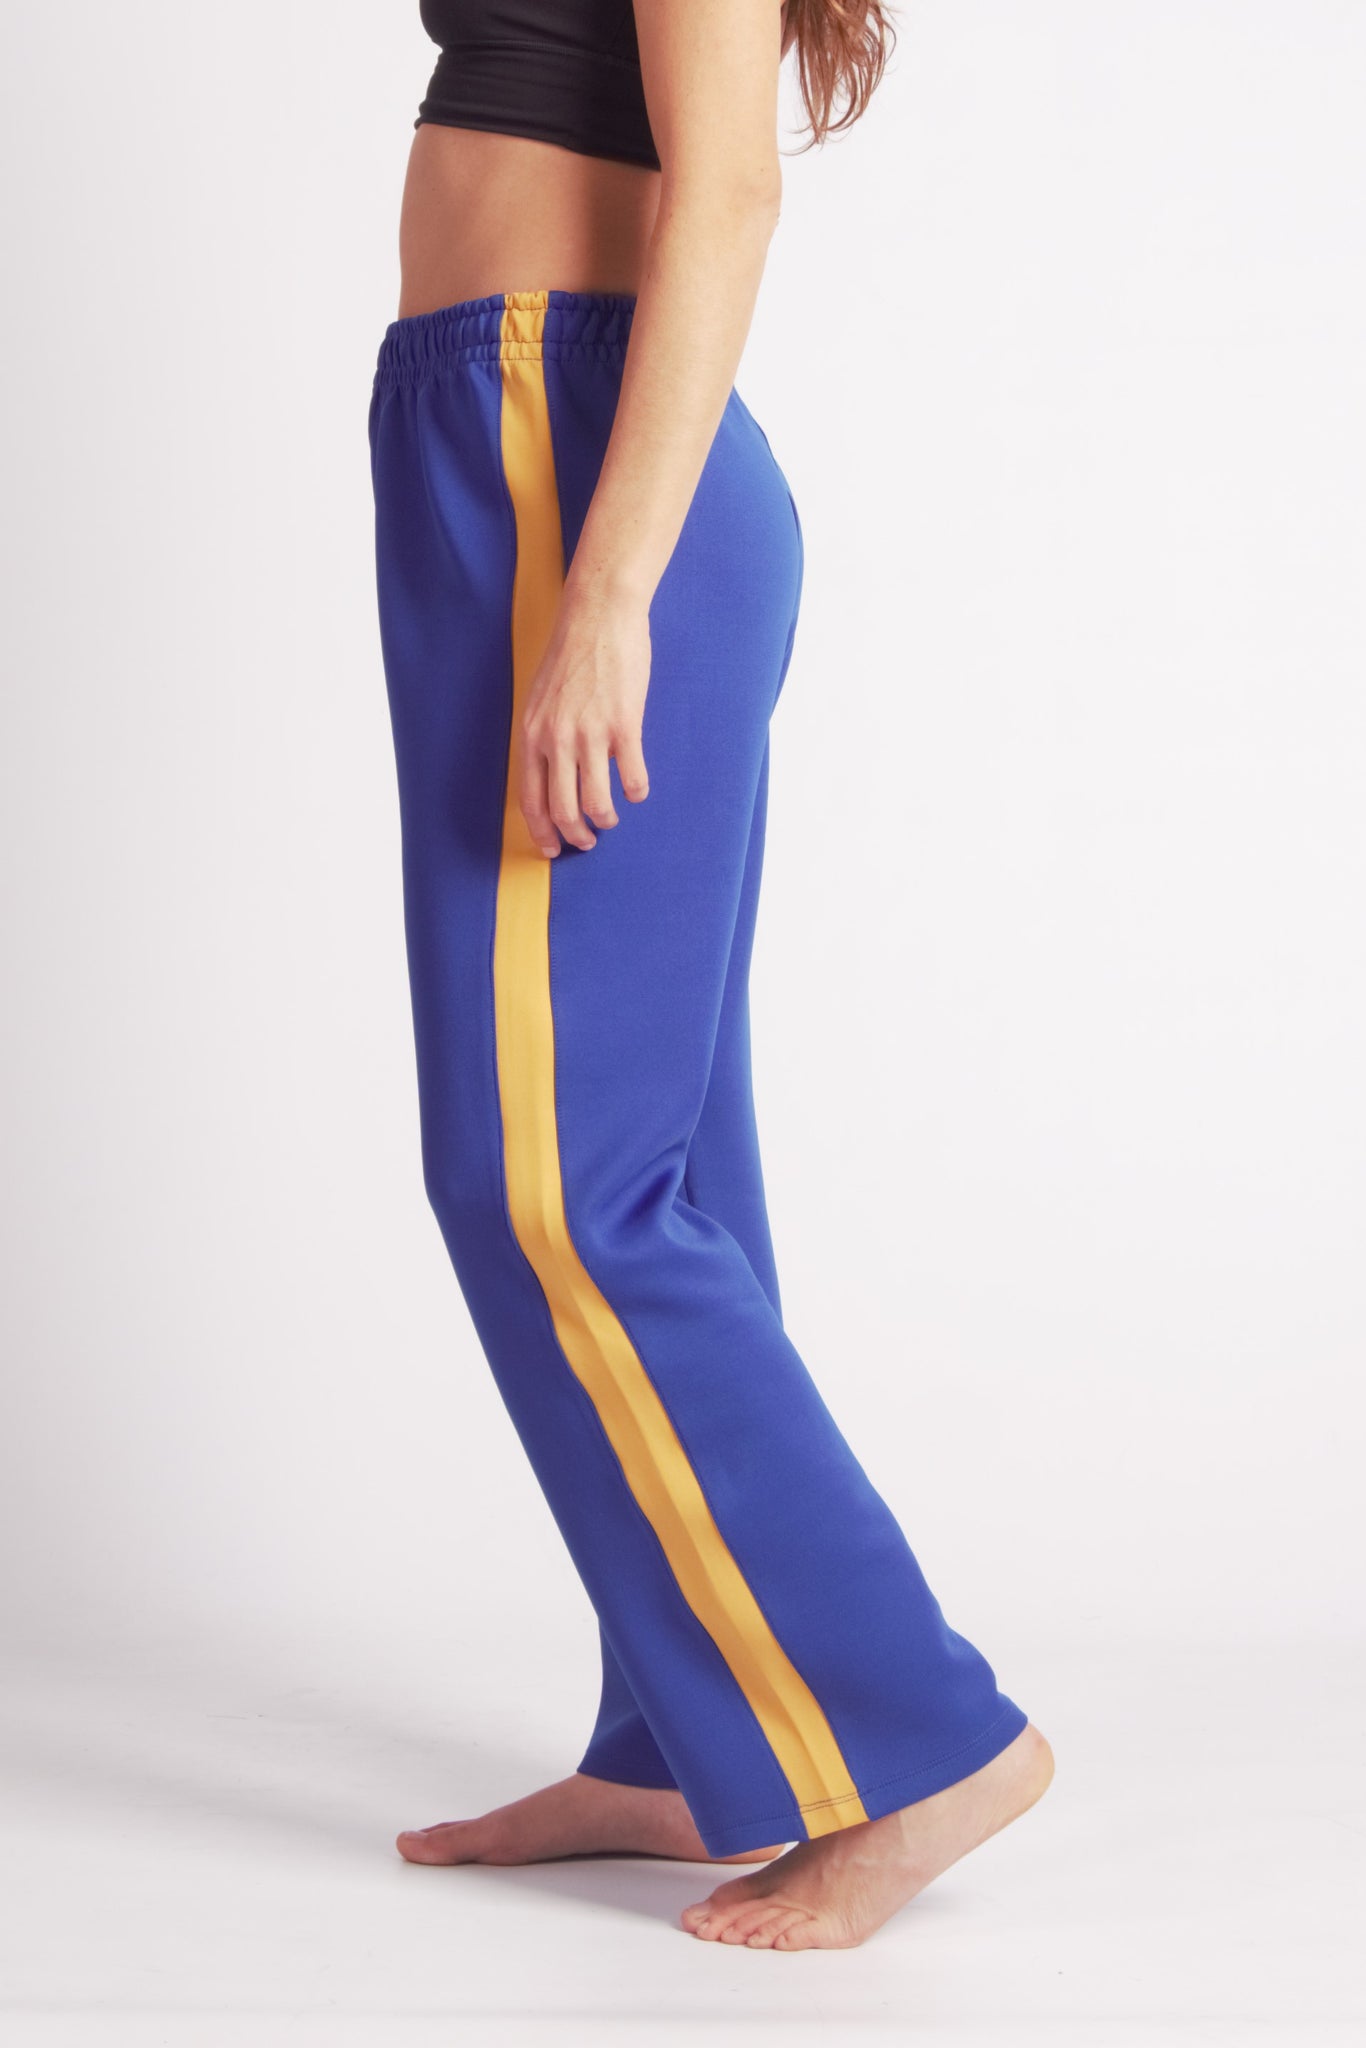 Flying Contemporary Dance Pants - Azul & Mostaza